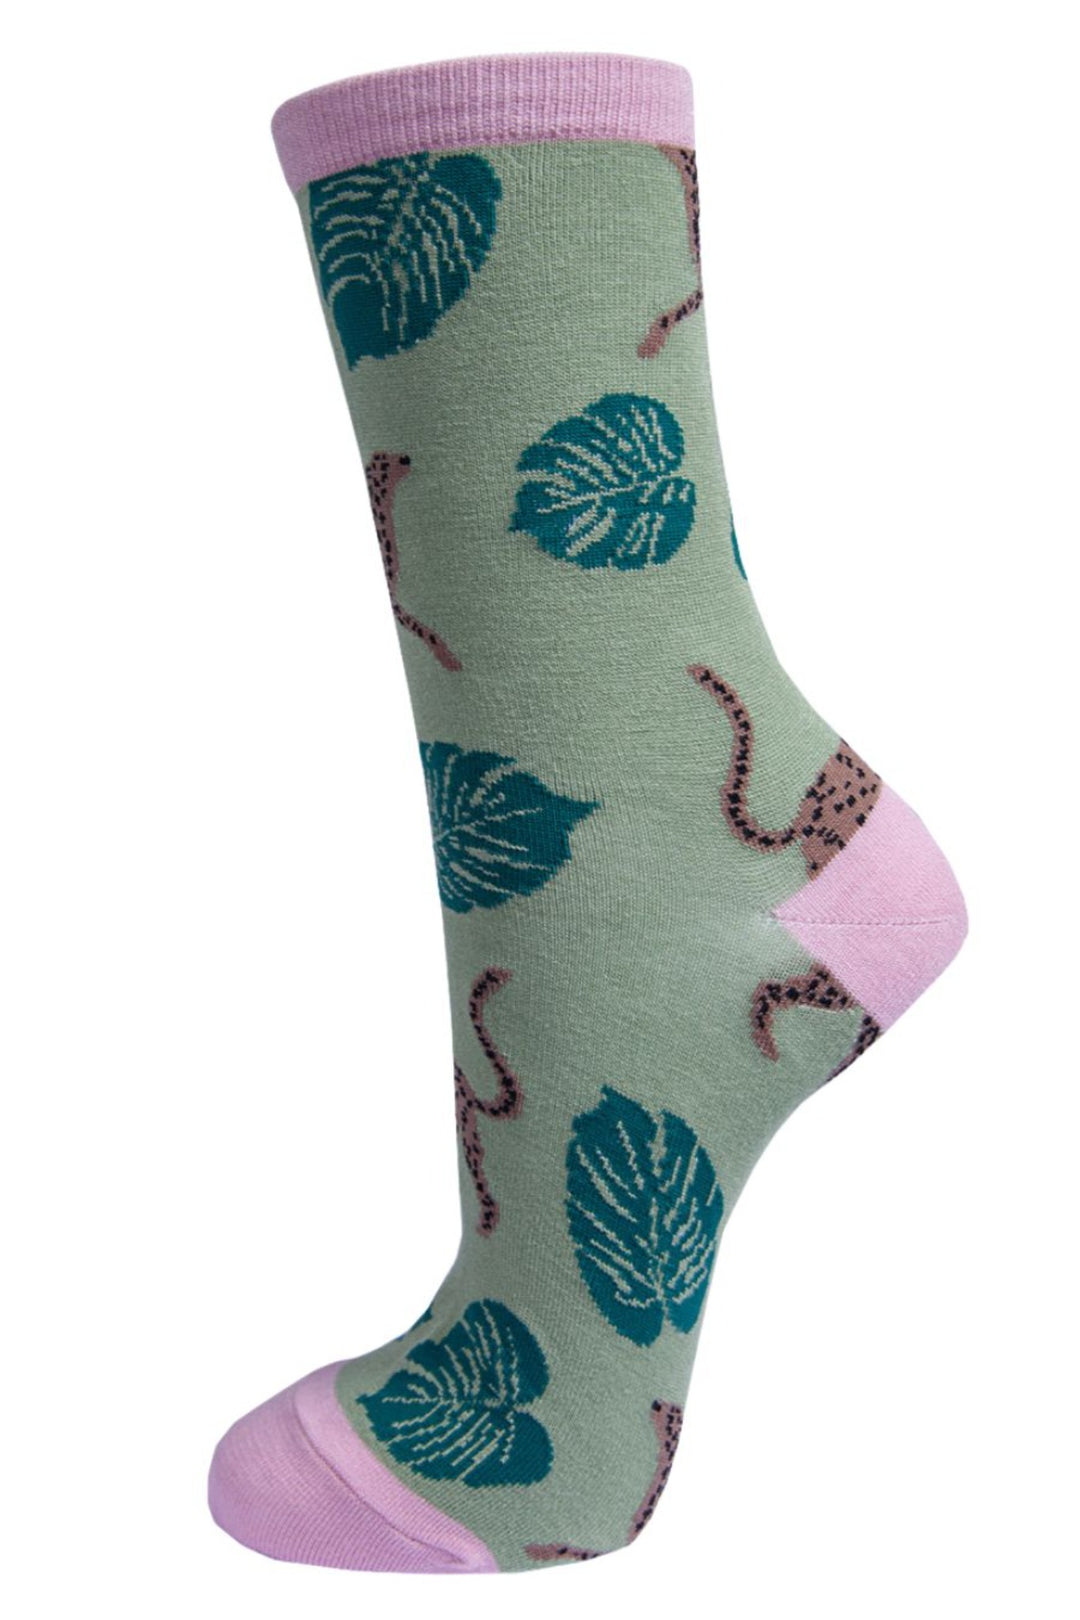 green socks with a pattern of cheetah cats and large green jungle leaves